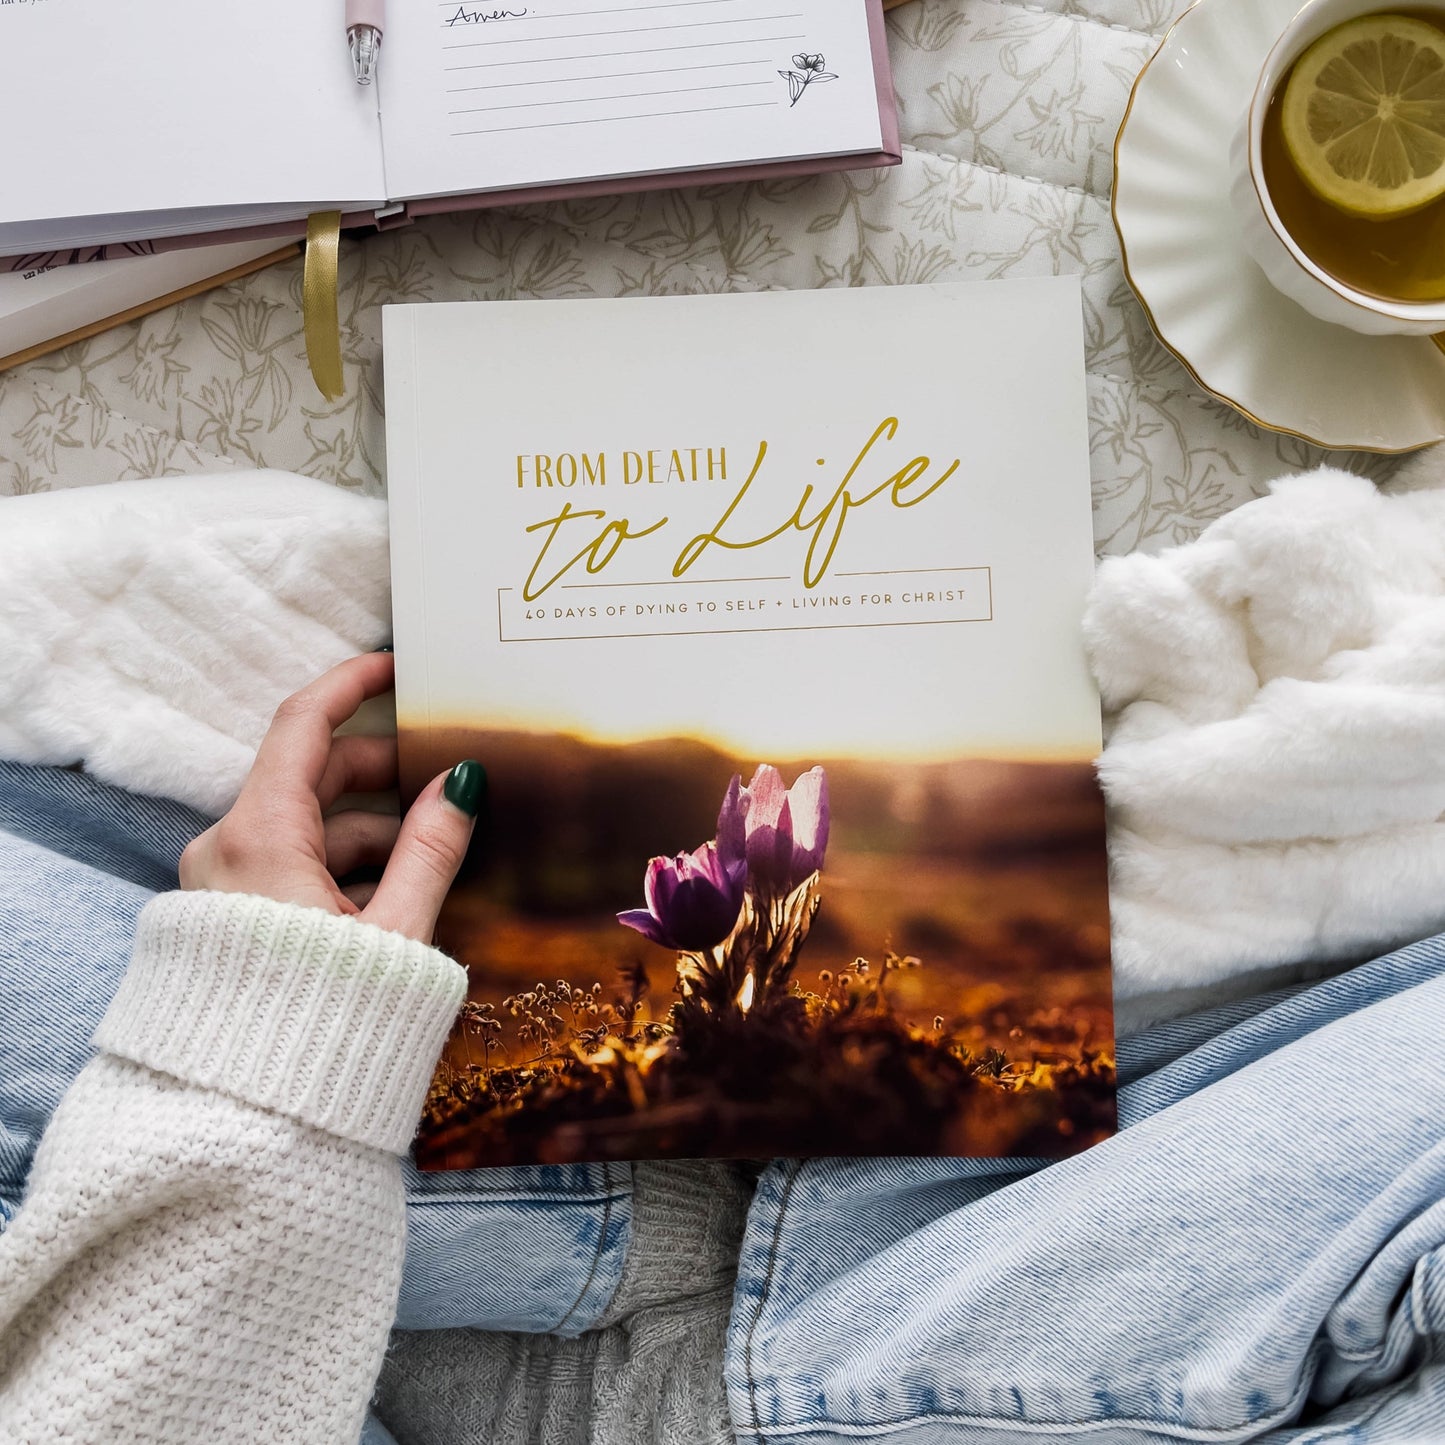 From Death to Life | 40 Days of Dying to Self and Living for Christ | TDGC